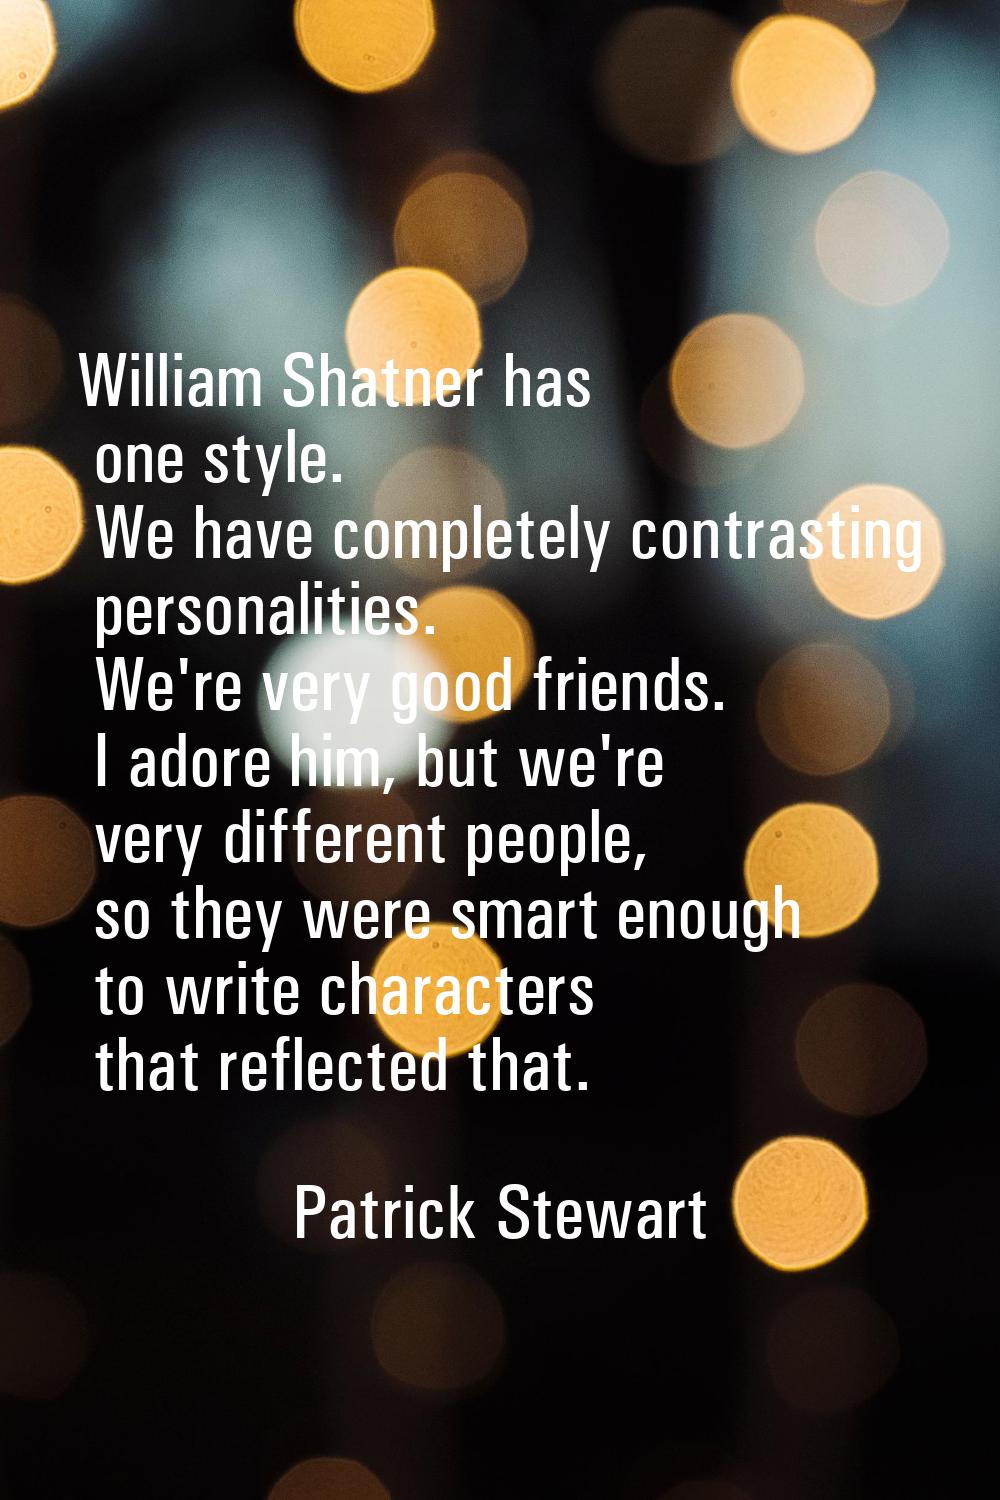 William Shatner has one style. We have completely contrasting personalities. We're very good friend